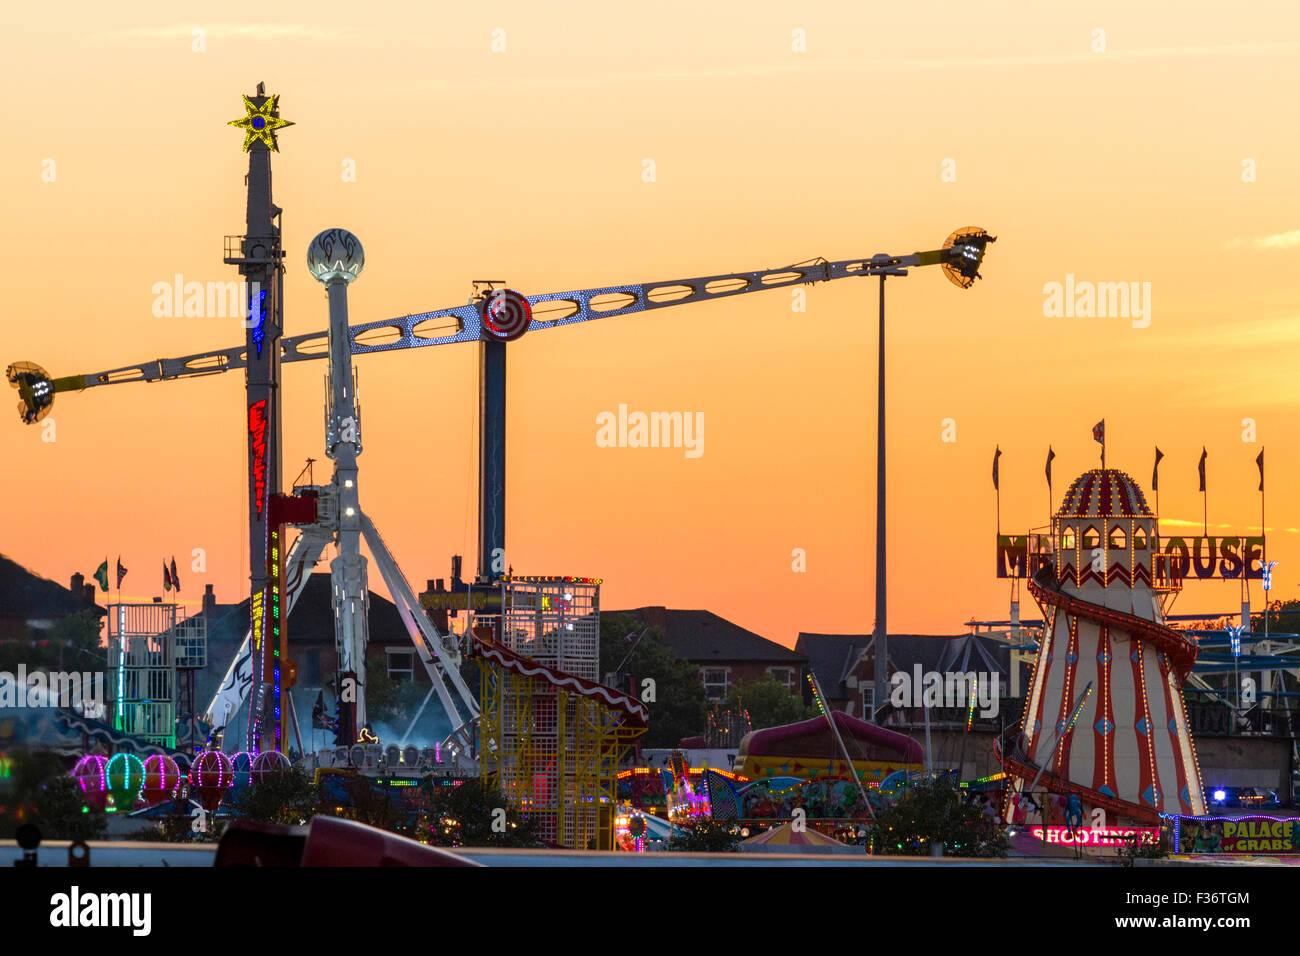 Nottingham, UK. 30th September 2015. Nottingham Goose Fair opened this evening and continues until Sunday 3rd October. It is one of Europe's largest travelling fairs with a history going back over 720 years. Credit:  Martyn Williams/Alamy Live News Stock Photo